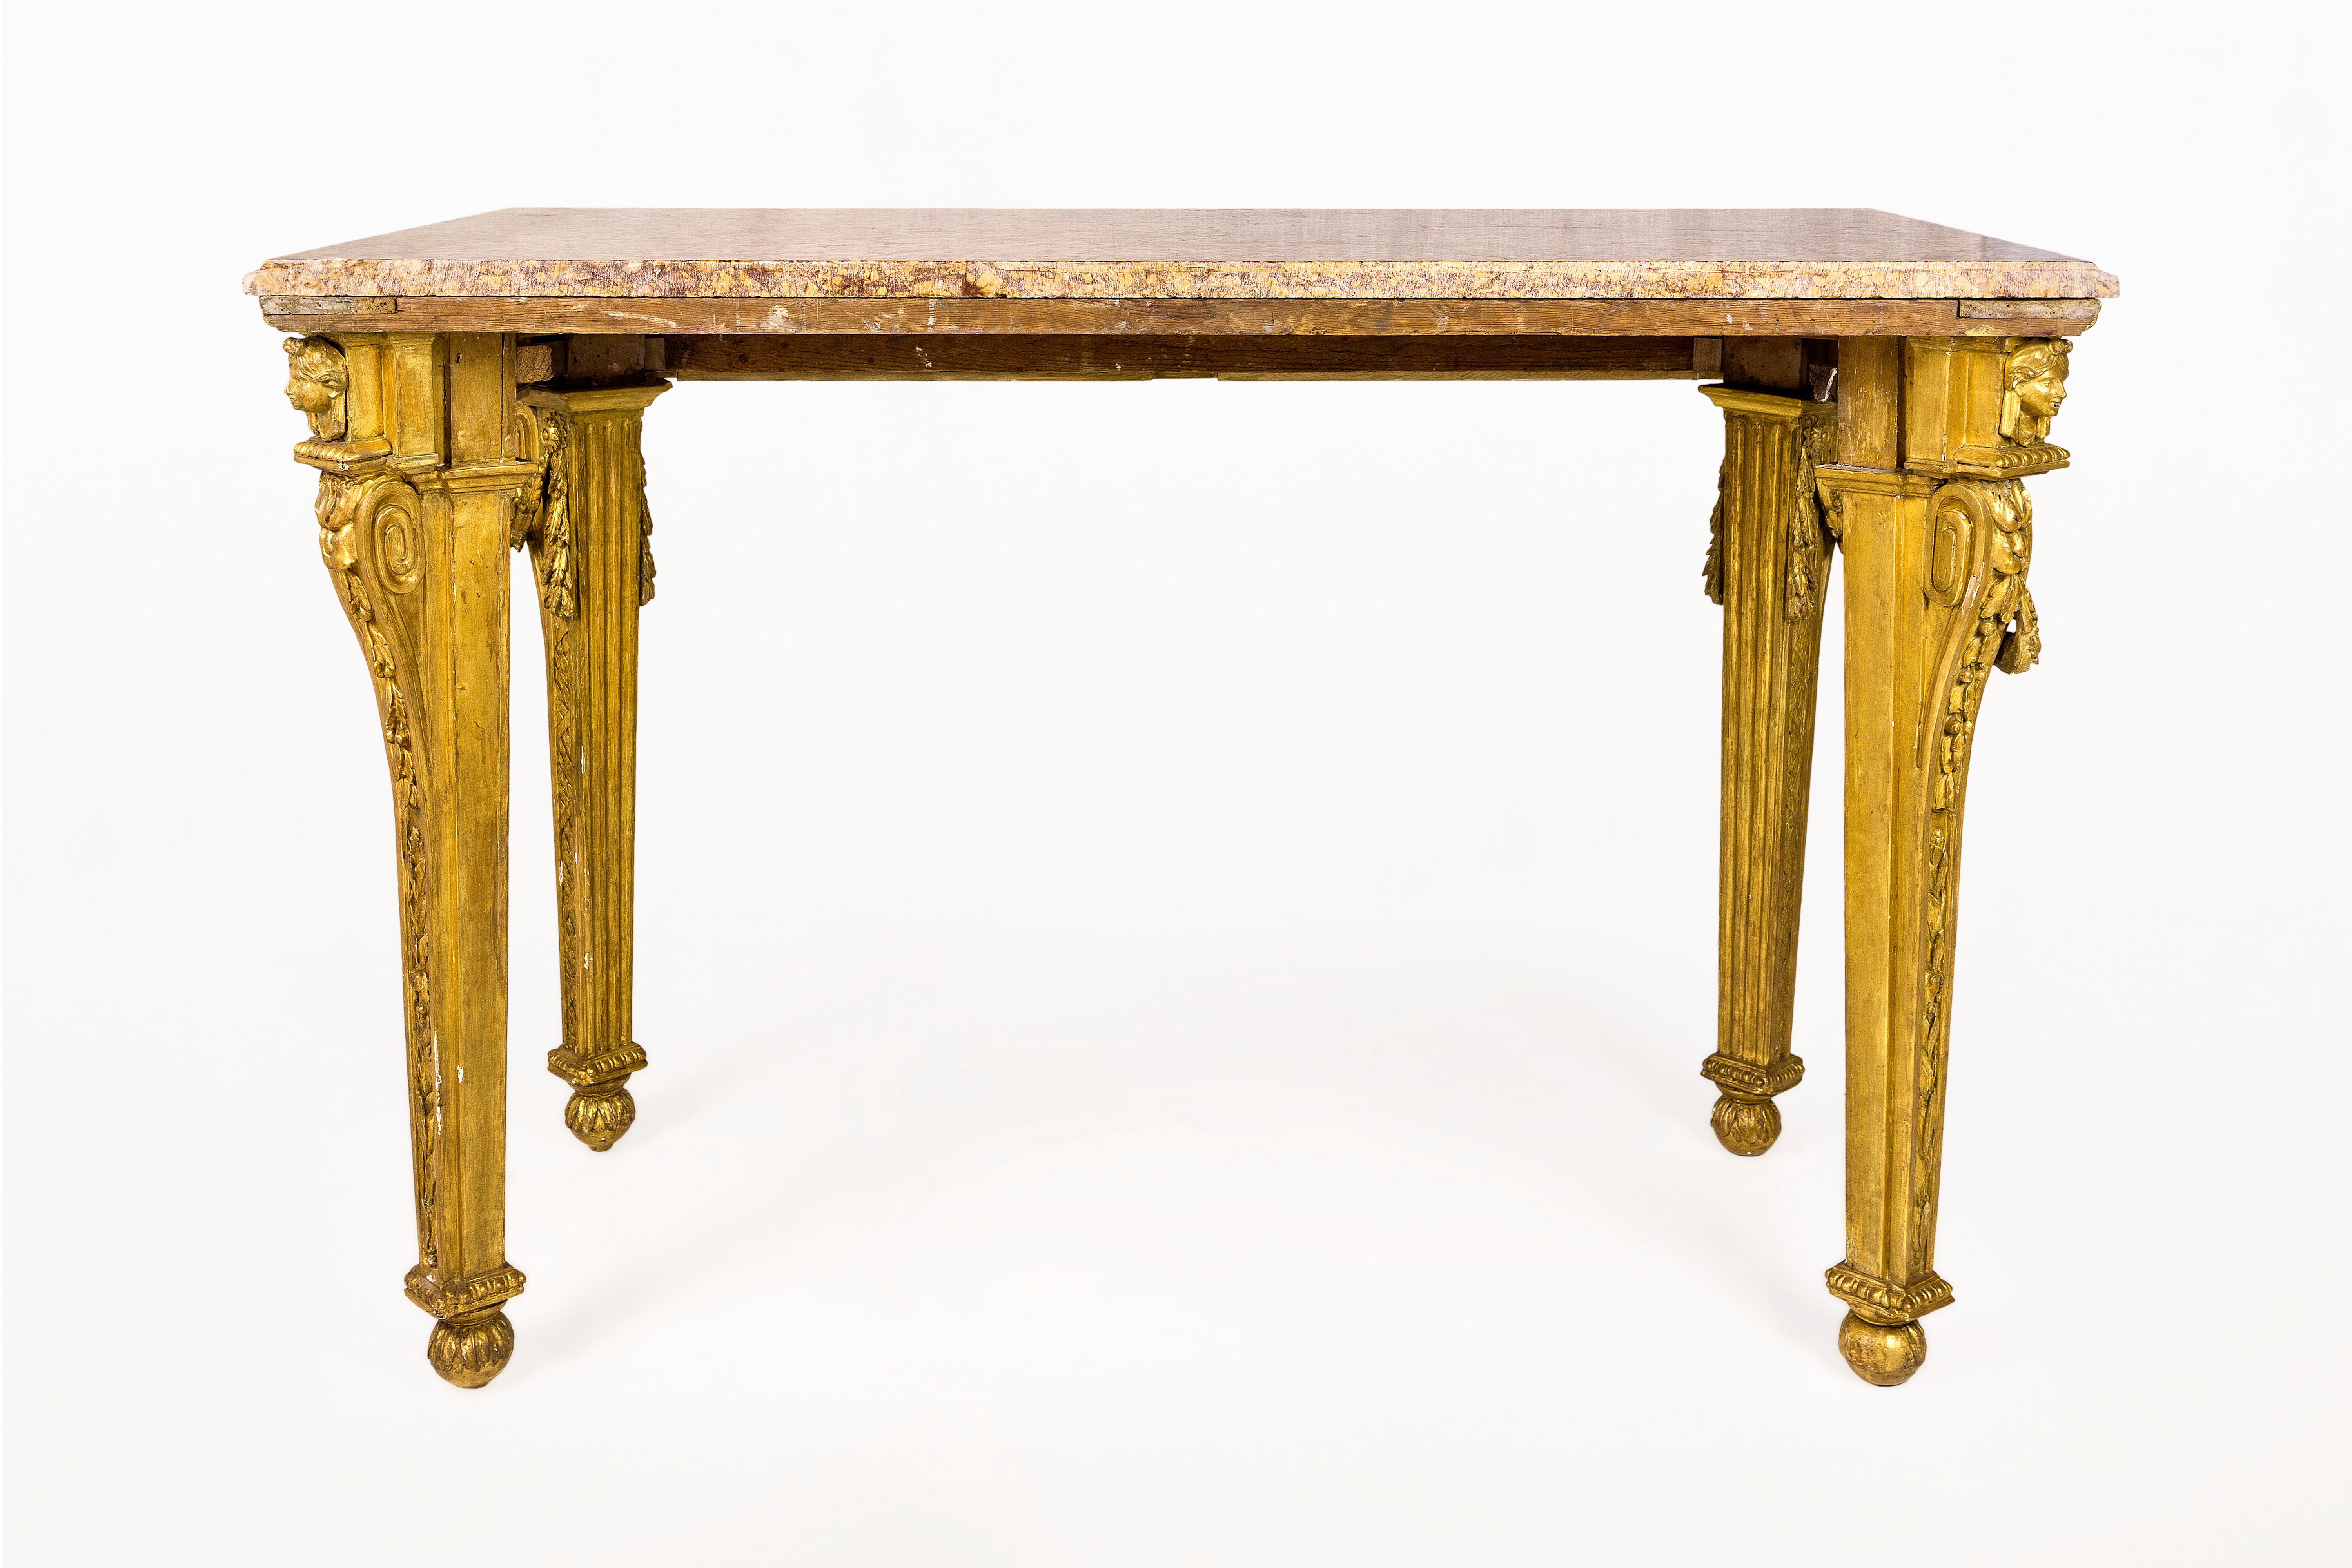 18th Century and Earlier Gilt Wooden Console, 18th Century, Italy